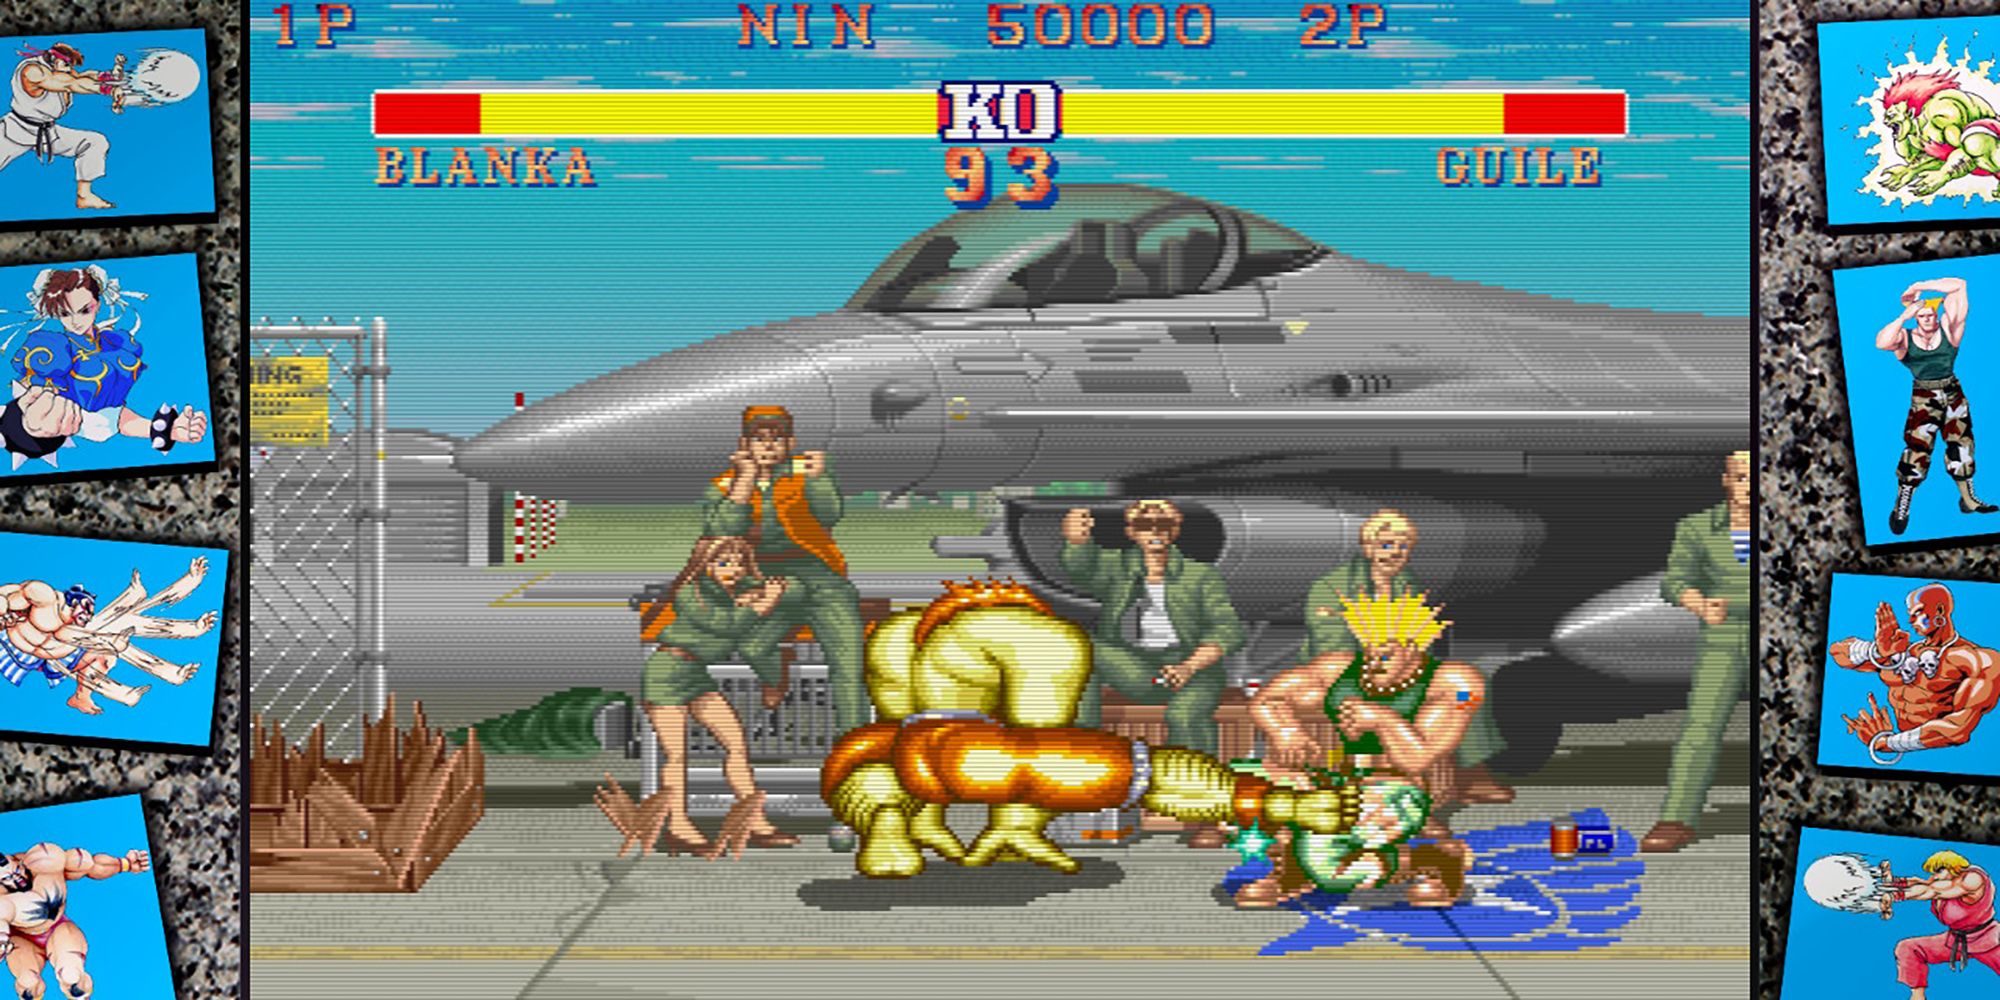 Blanka fights Guile in front of a military jet in Street Fighter 2: The World Warriors.